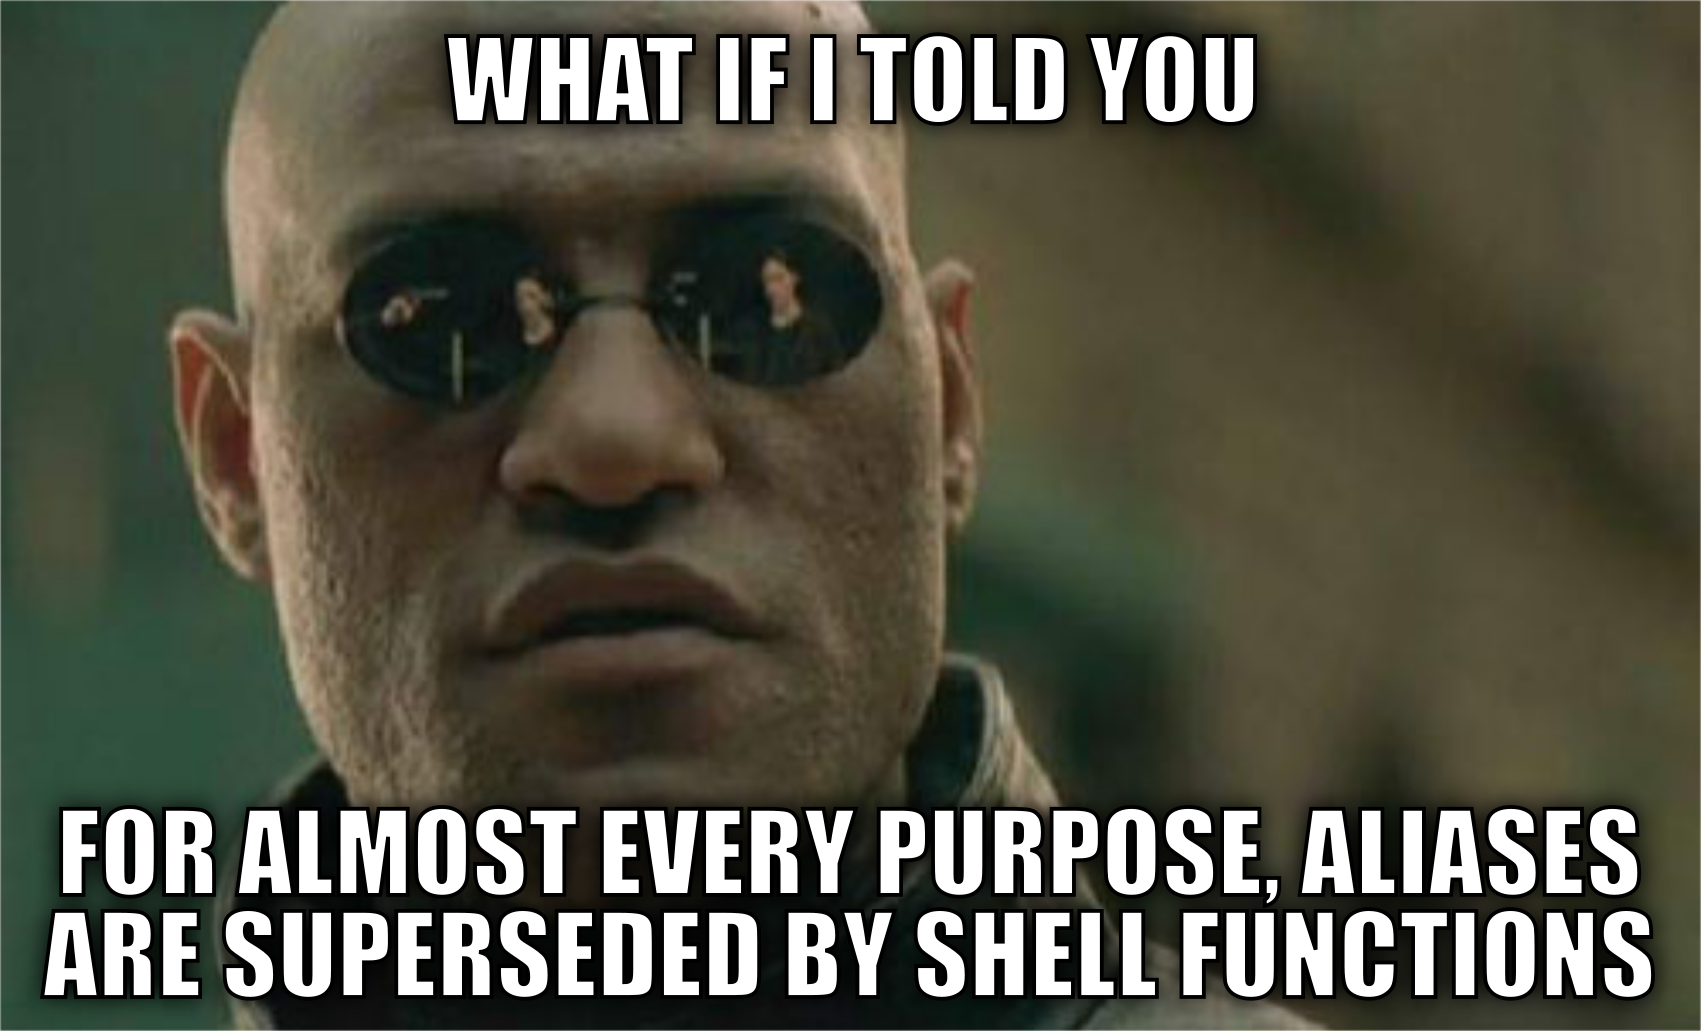 What if I told you, for almost every purpose aliases are superseded by shell functions.